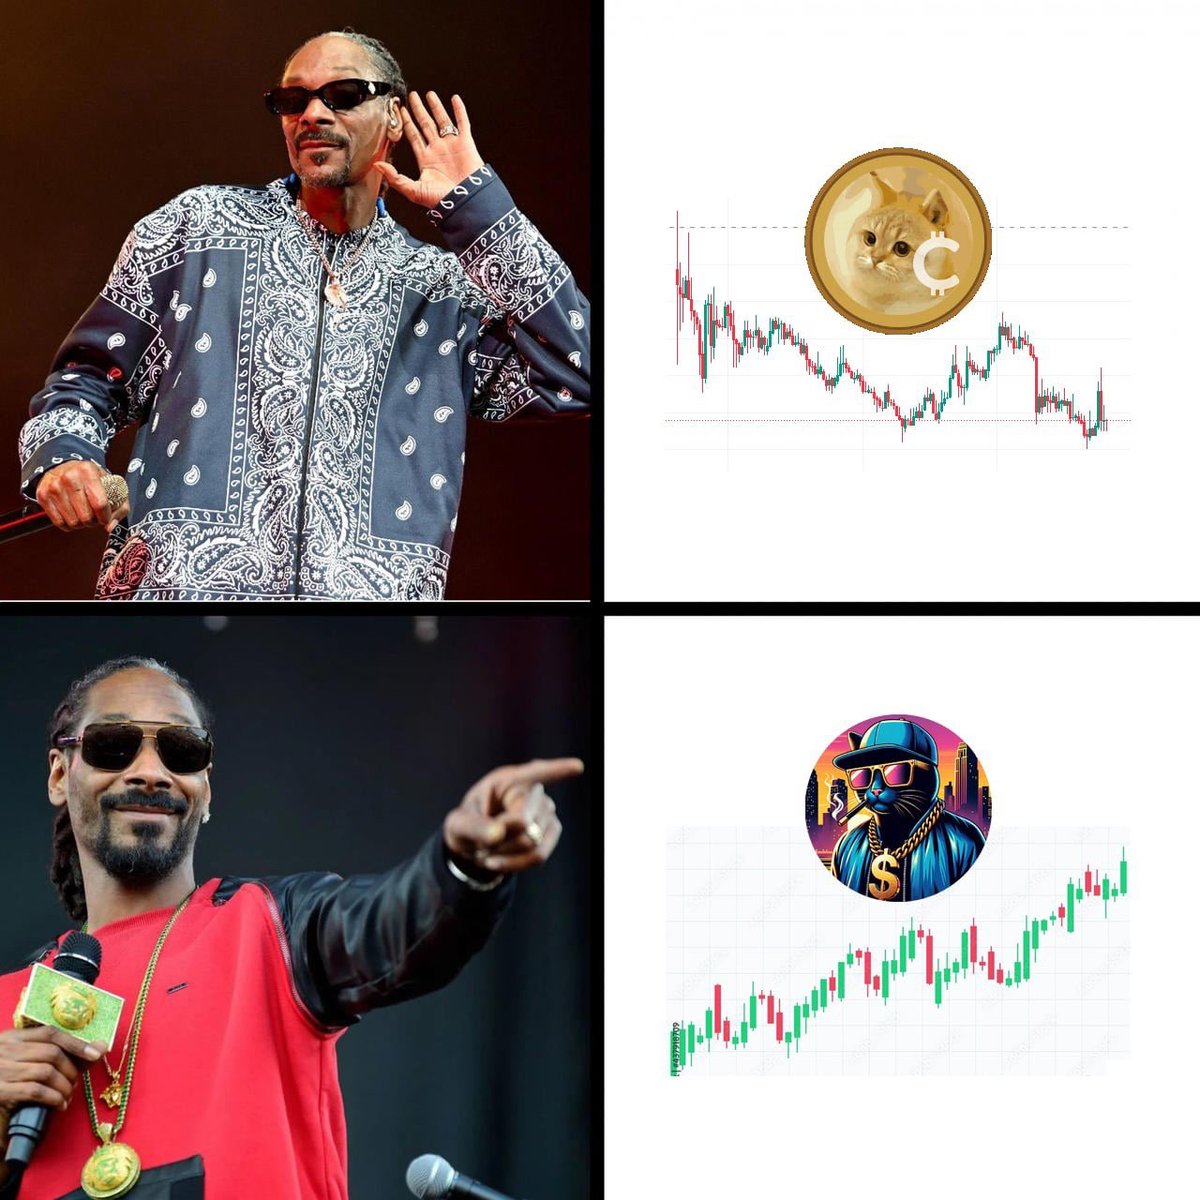 🐱Inspired by the legendary Snoop Dogg but forged in the crucible of the underworld,
🐱 Website: snoopcats.org
🐱 Twitter: x.com/snoopcattoken
#snoopcat #memecoin #BSC 
USQVRI

#art #nftcollector #rise #MichaelSaylor #forexlife